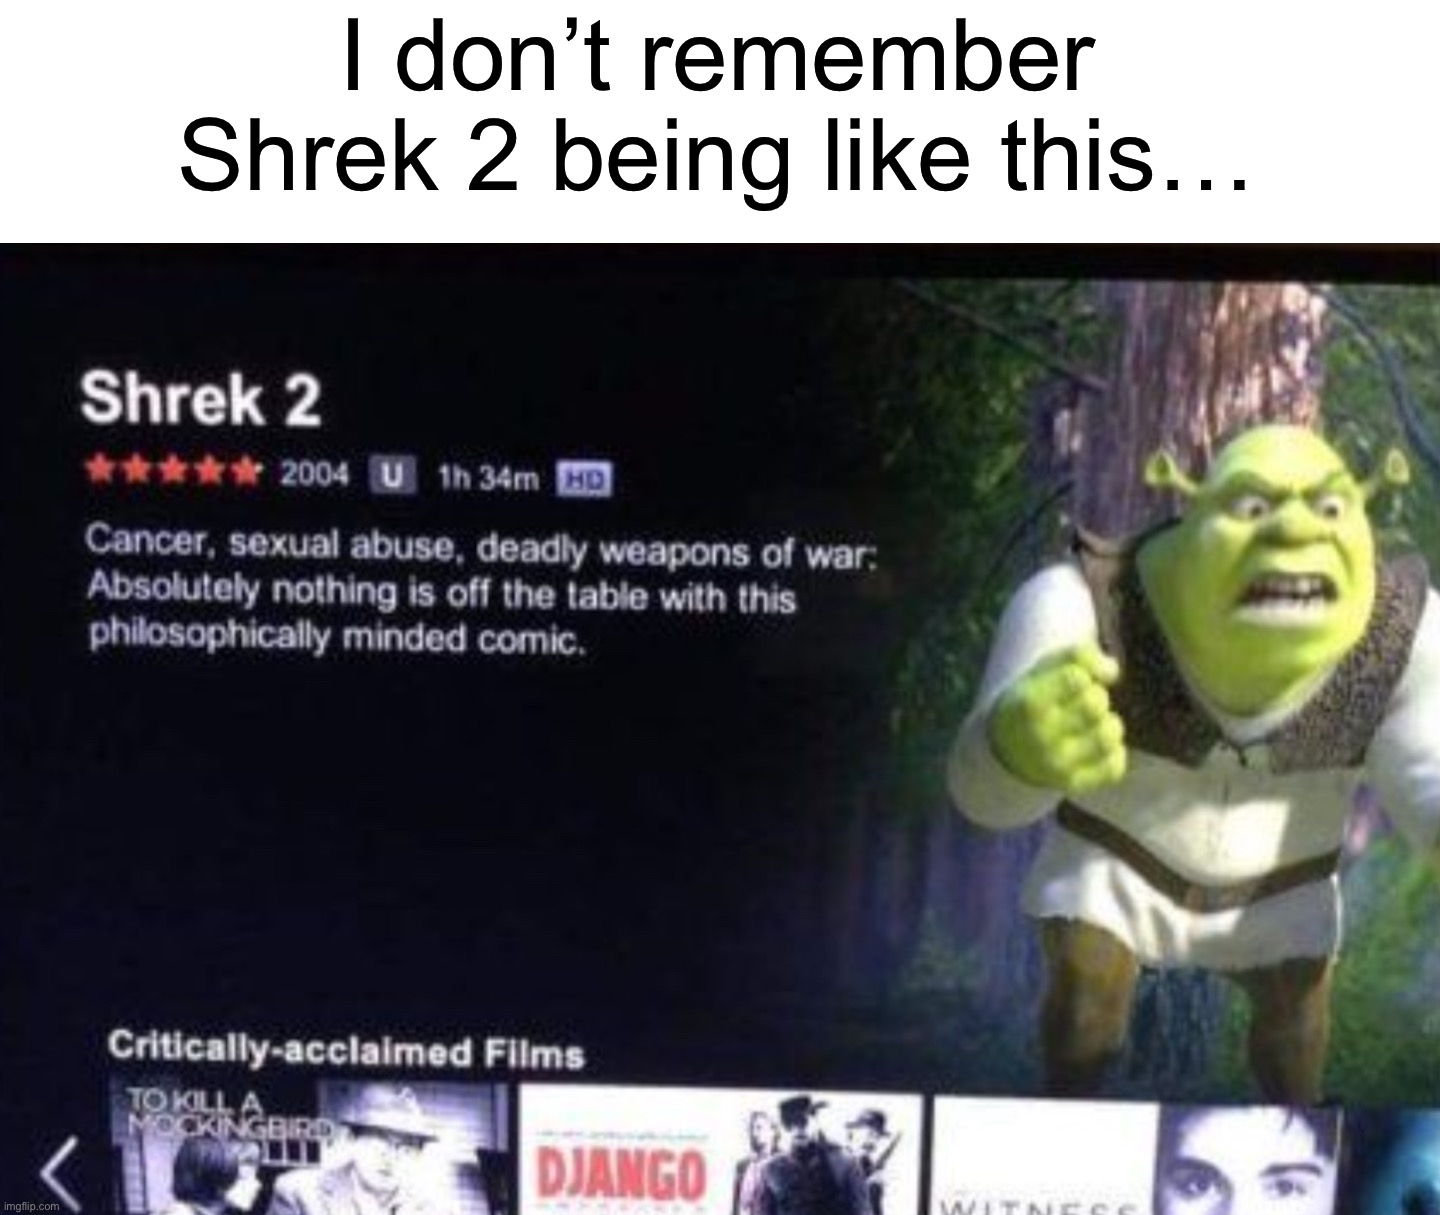 Hmmm | I don’t remember Shrek 2 being like this… | image tagged in memes,funny,shrek,wtf,how did this happen,uh oh | made w/ Imgflip meme maker